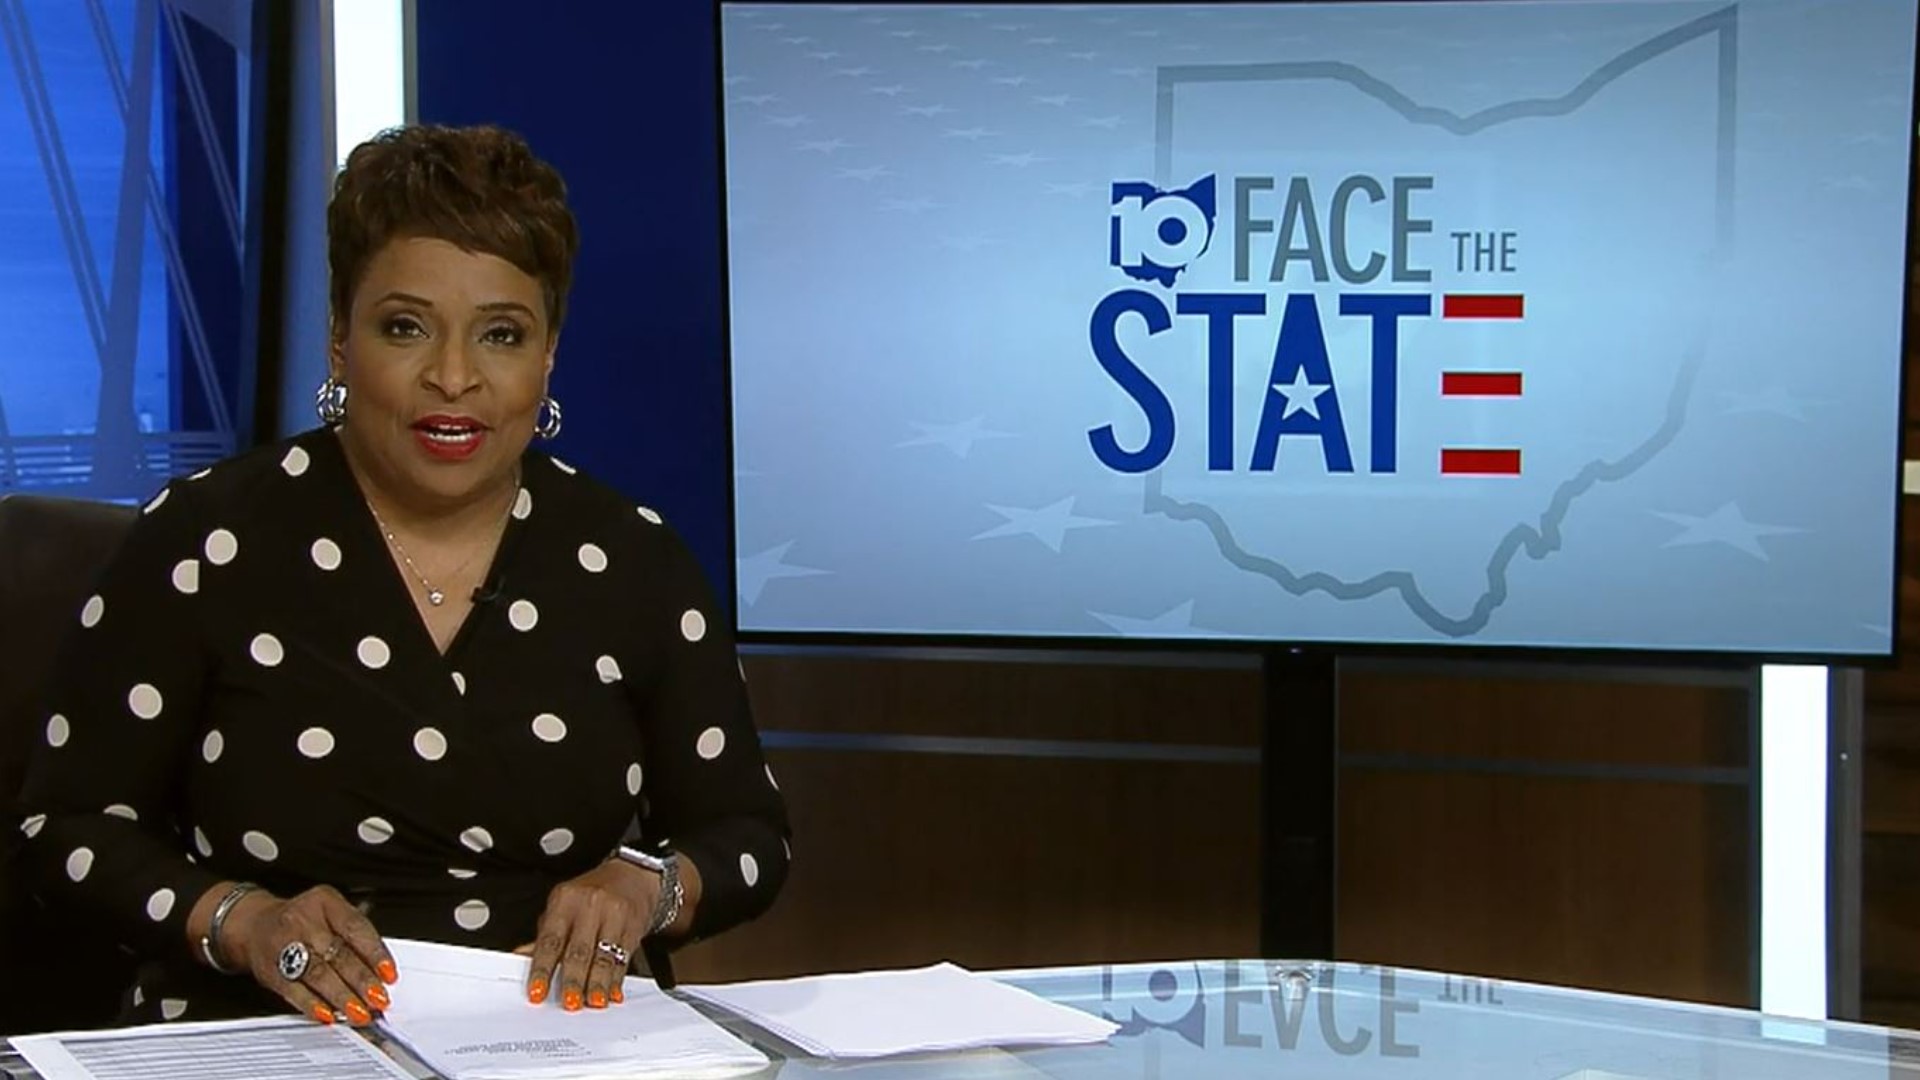 This week's Face the State is about Ohio's 15th Congressional District, plans for protecting the state's water and critical race theory.